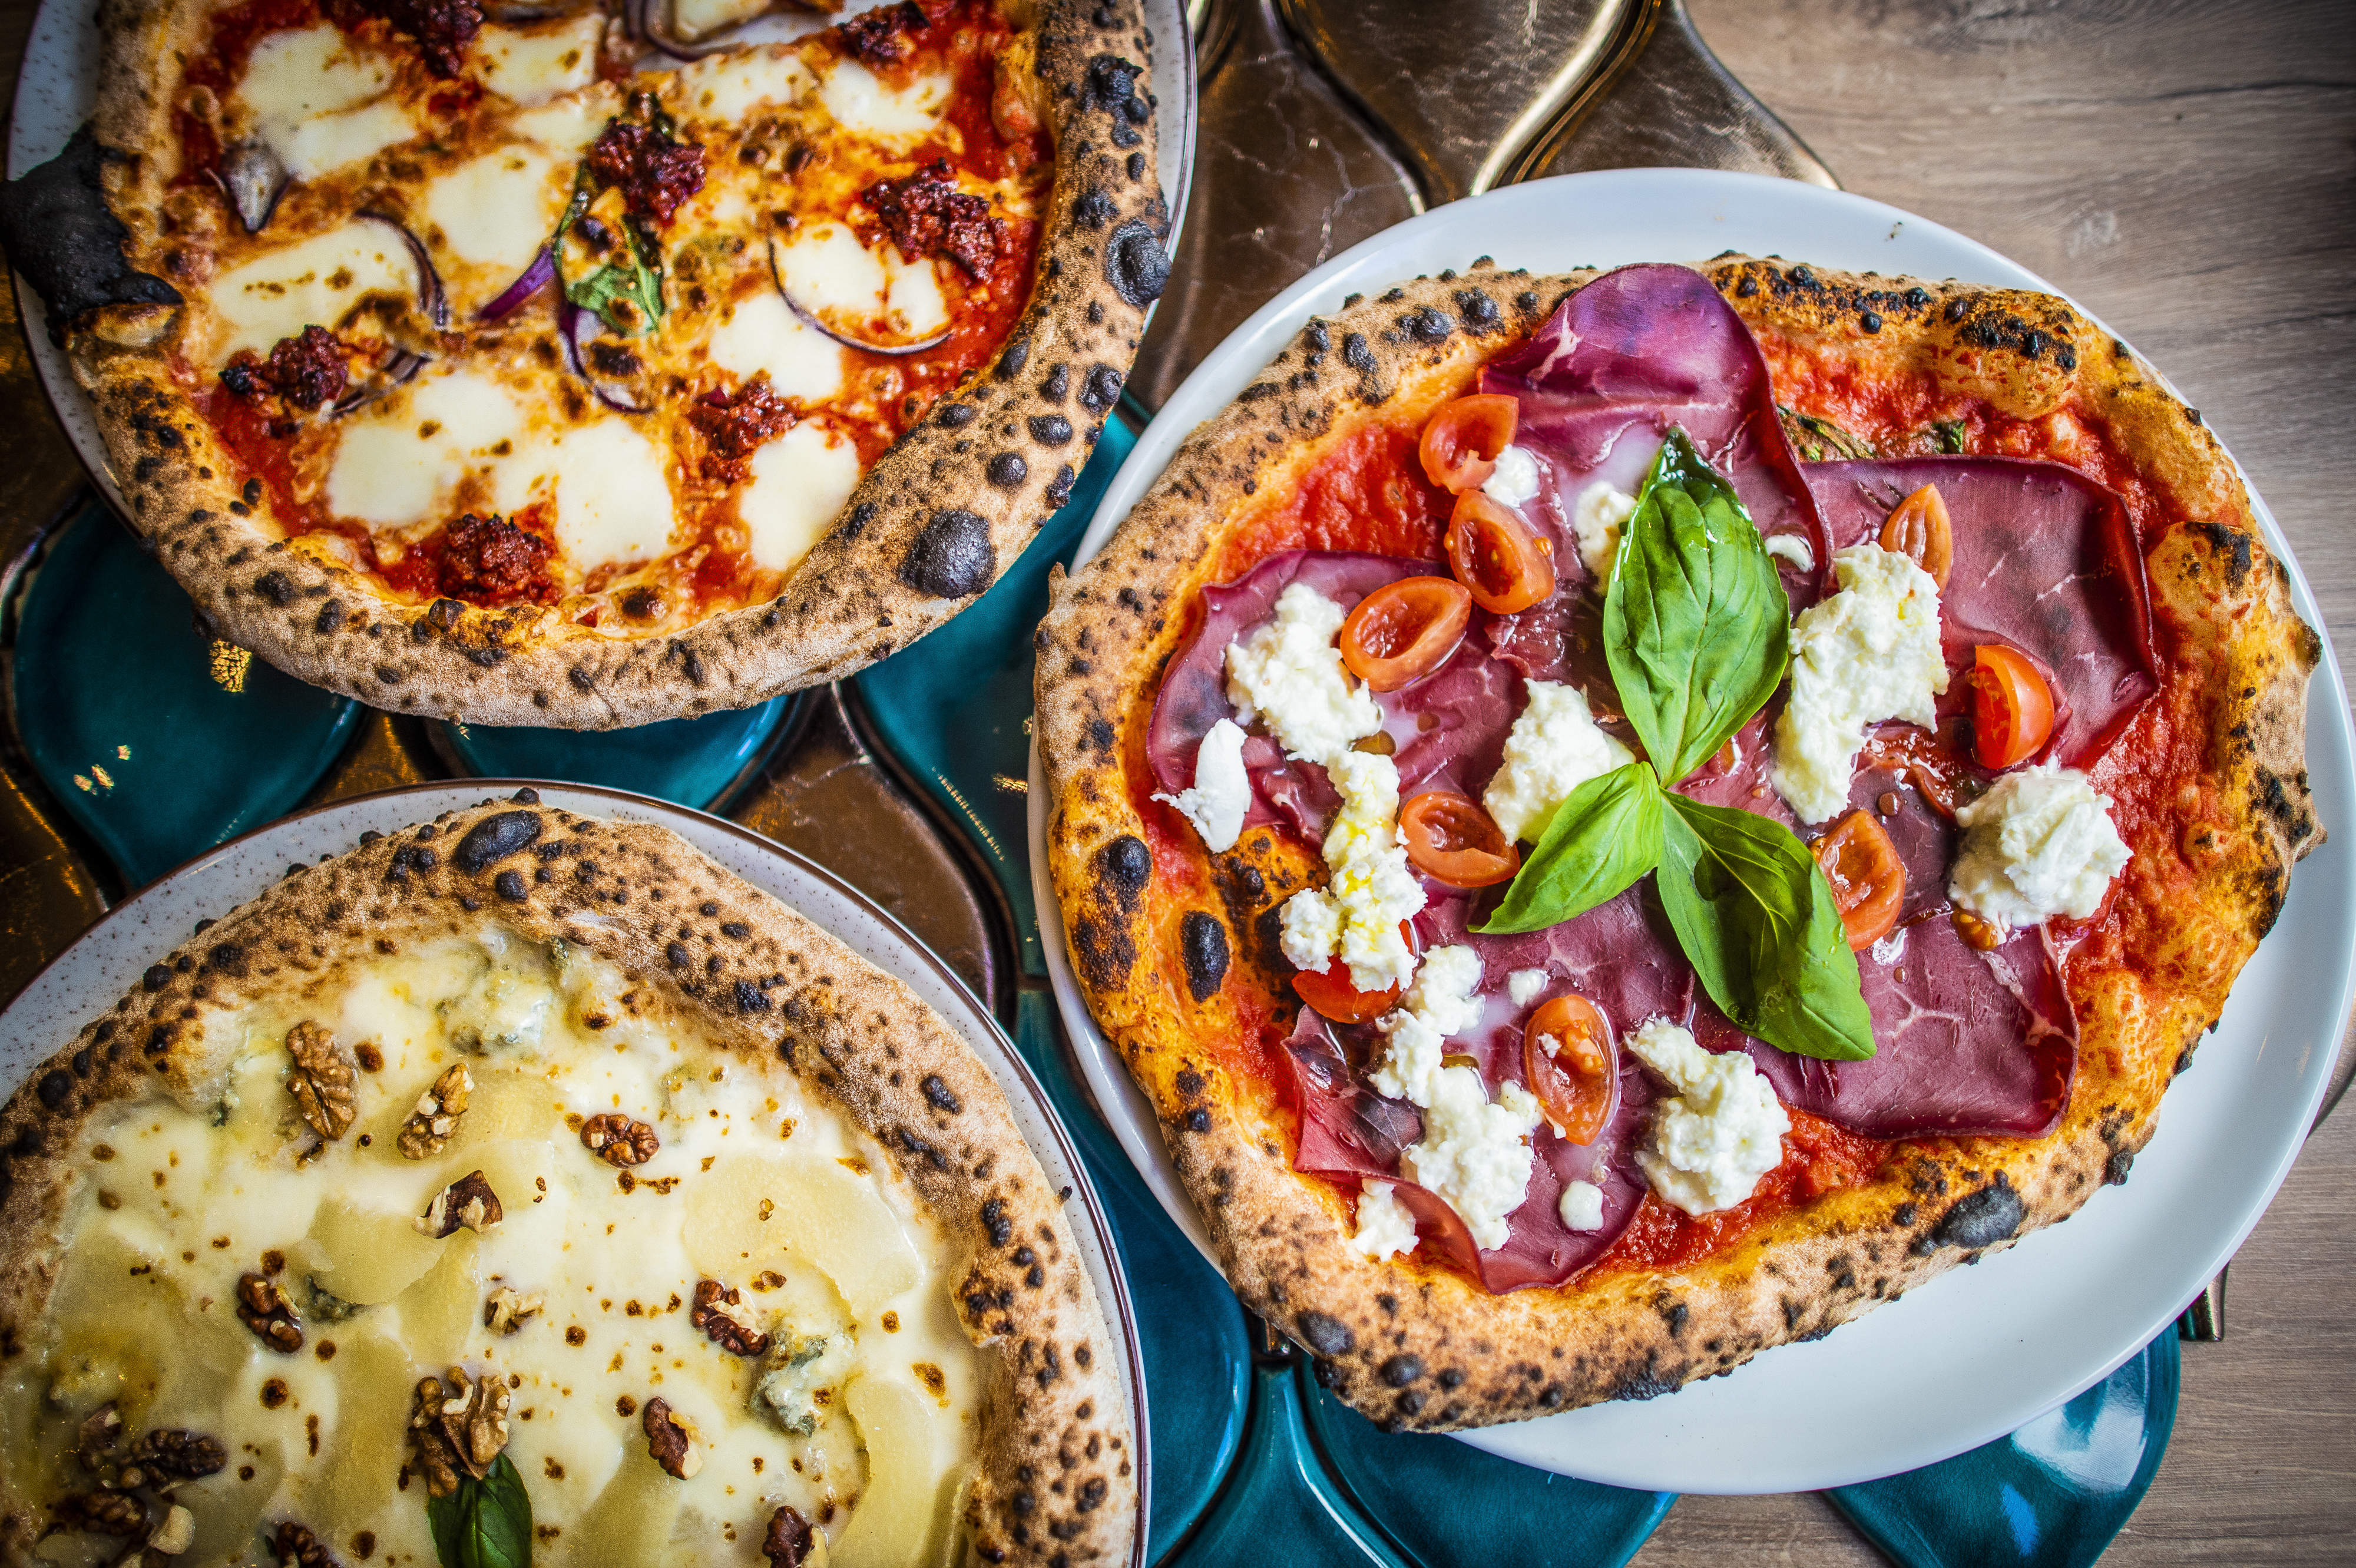 Pizza pronto! 10 best pizzerias in Budapest for home delivery